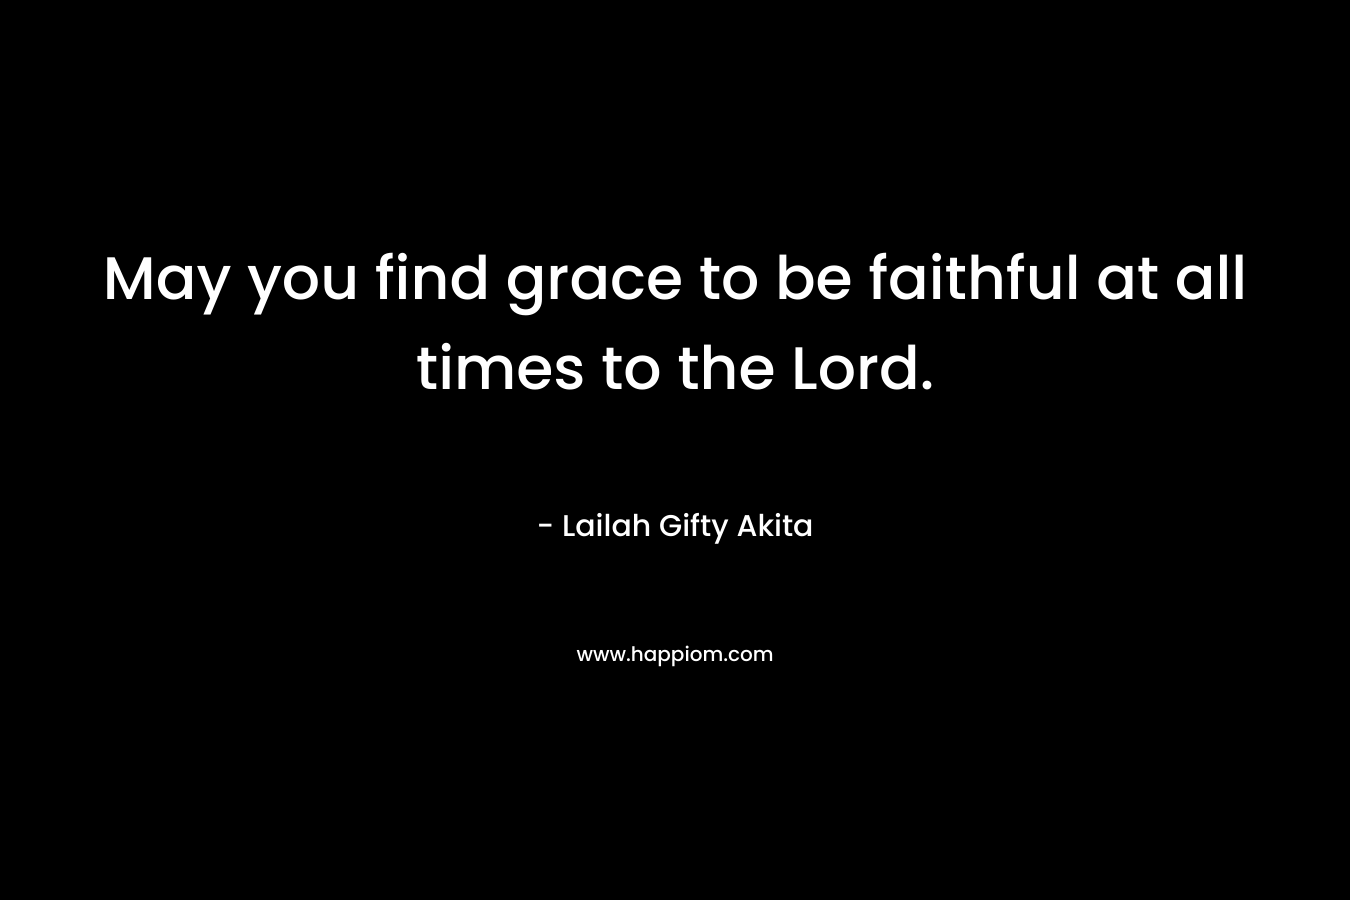 May you find grace to be faithful at all times to the Lord.